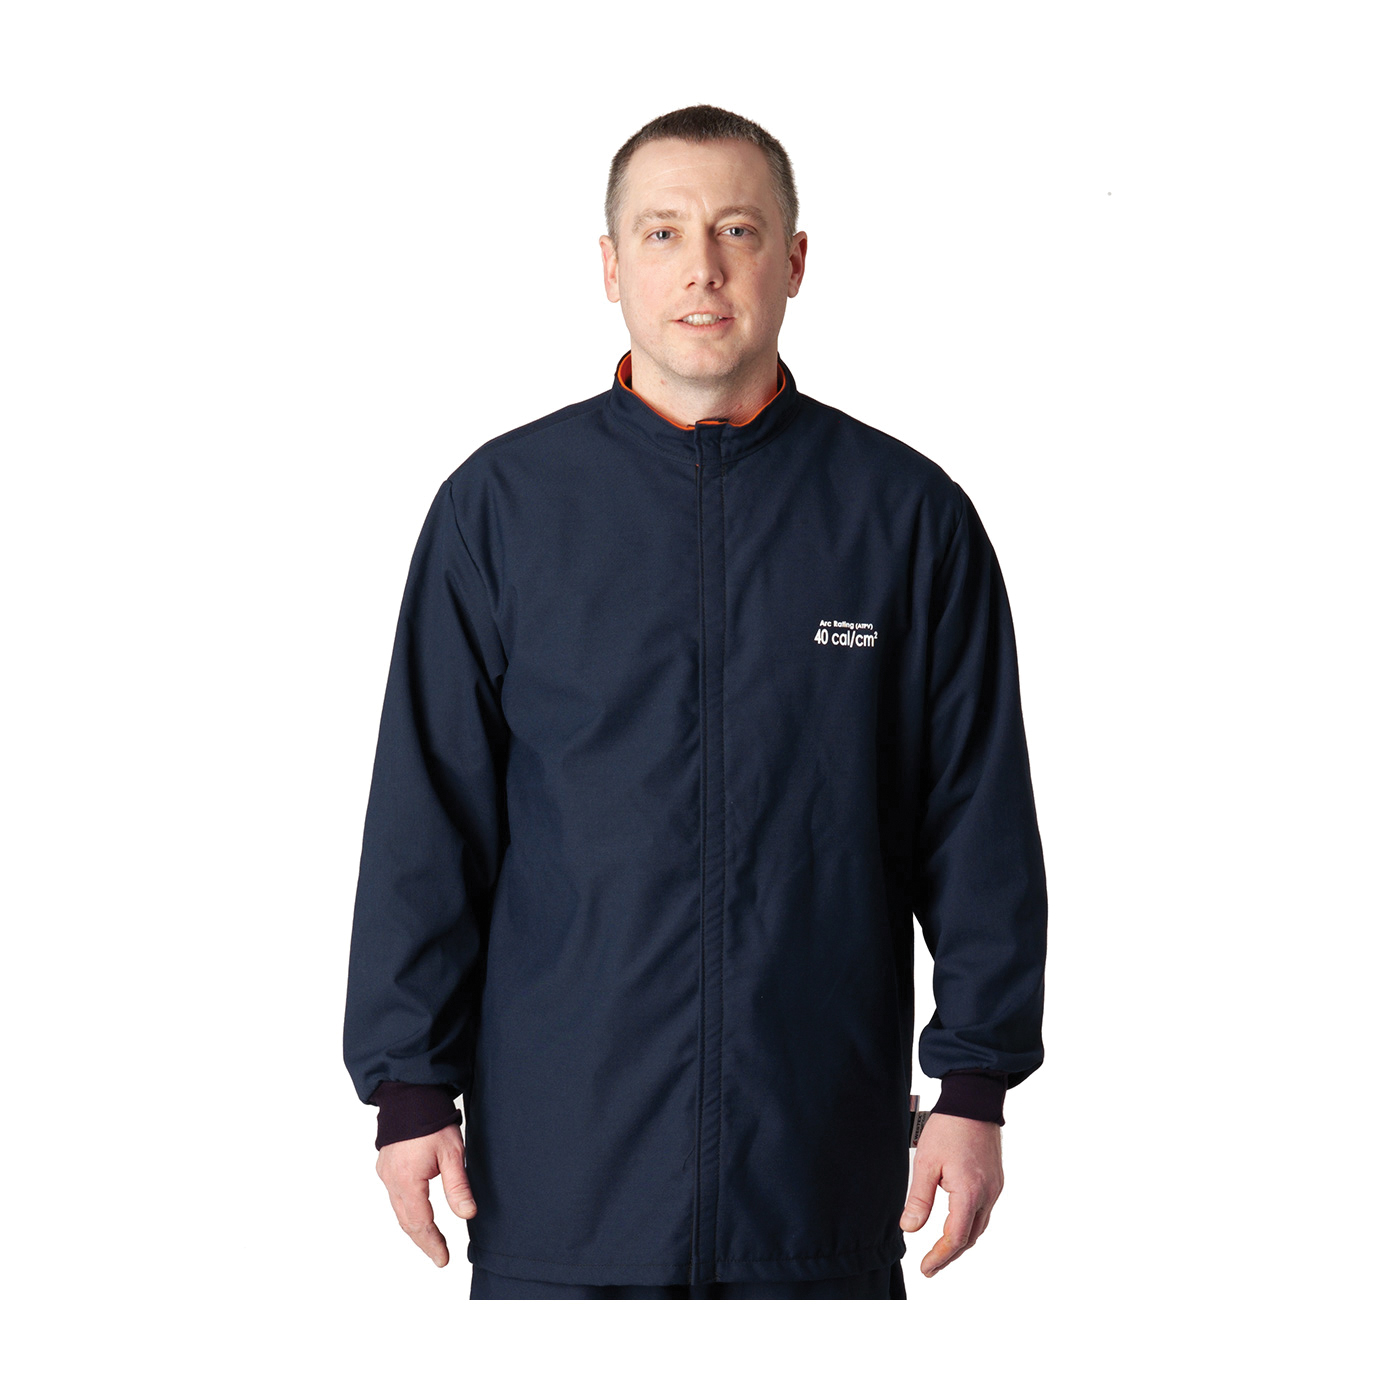 PIP® 9100-524ULT/3X Ultra Light Arc and Flame Resistant Jacket, 3XL, Navy Blue, DuPont™ Protera®/Westex® Ultrasoft, 56 to 58 in Chest, Resists: Arc and Flame, ASTM F1506-10a, ASTM F2178-12